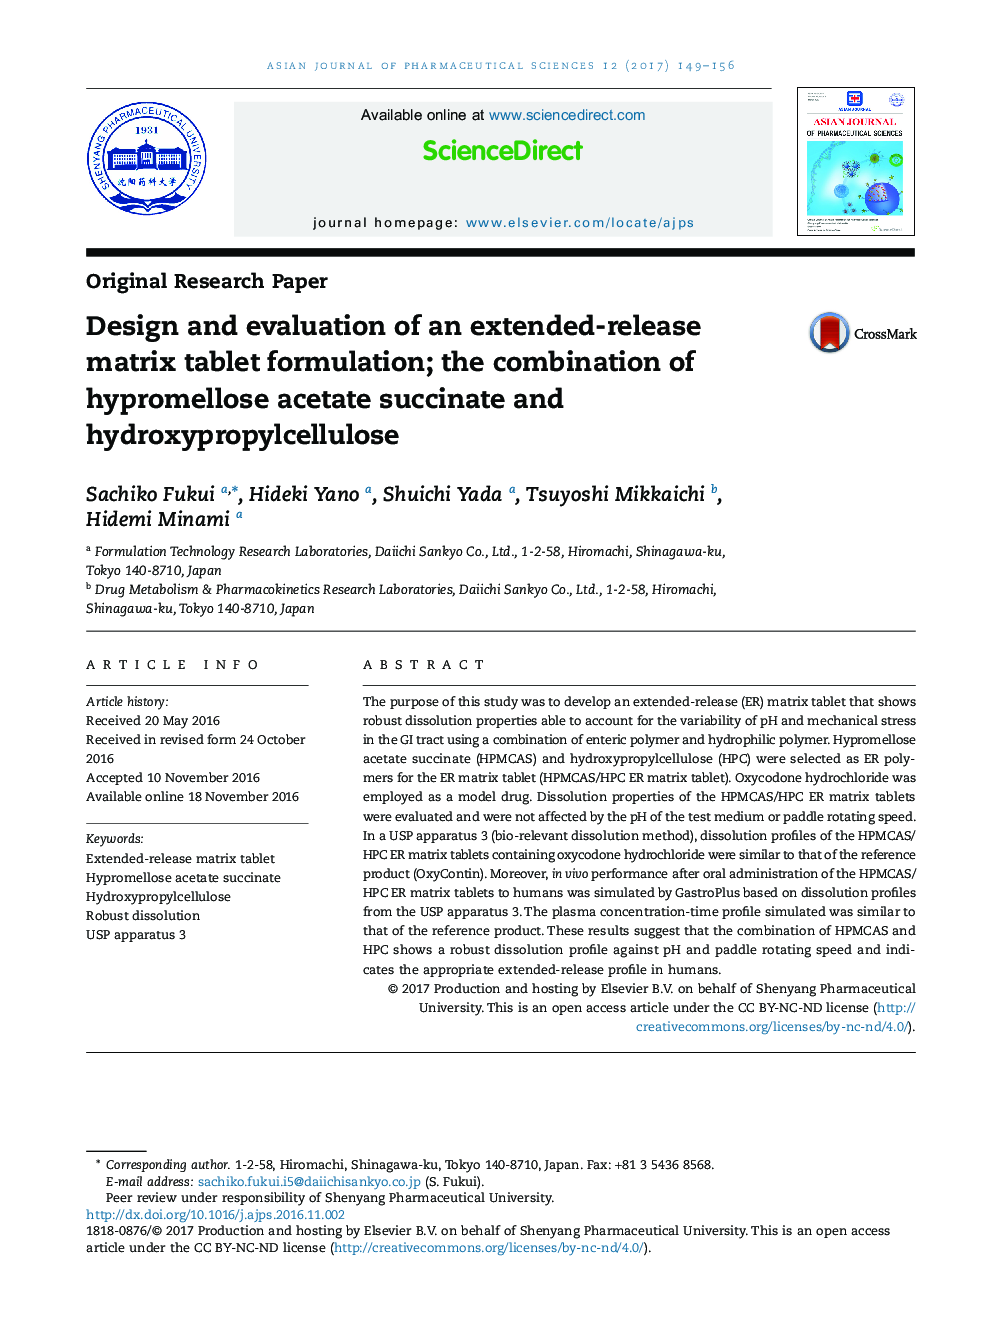 Design and evaluation of an extended-release matrix tablet formulation; the combination of hypromellose acetate succinate and hydroxypropylcellulose